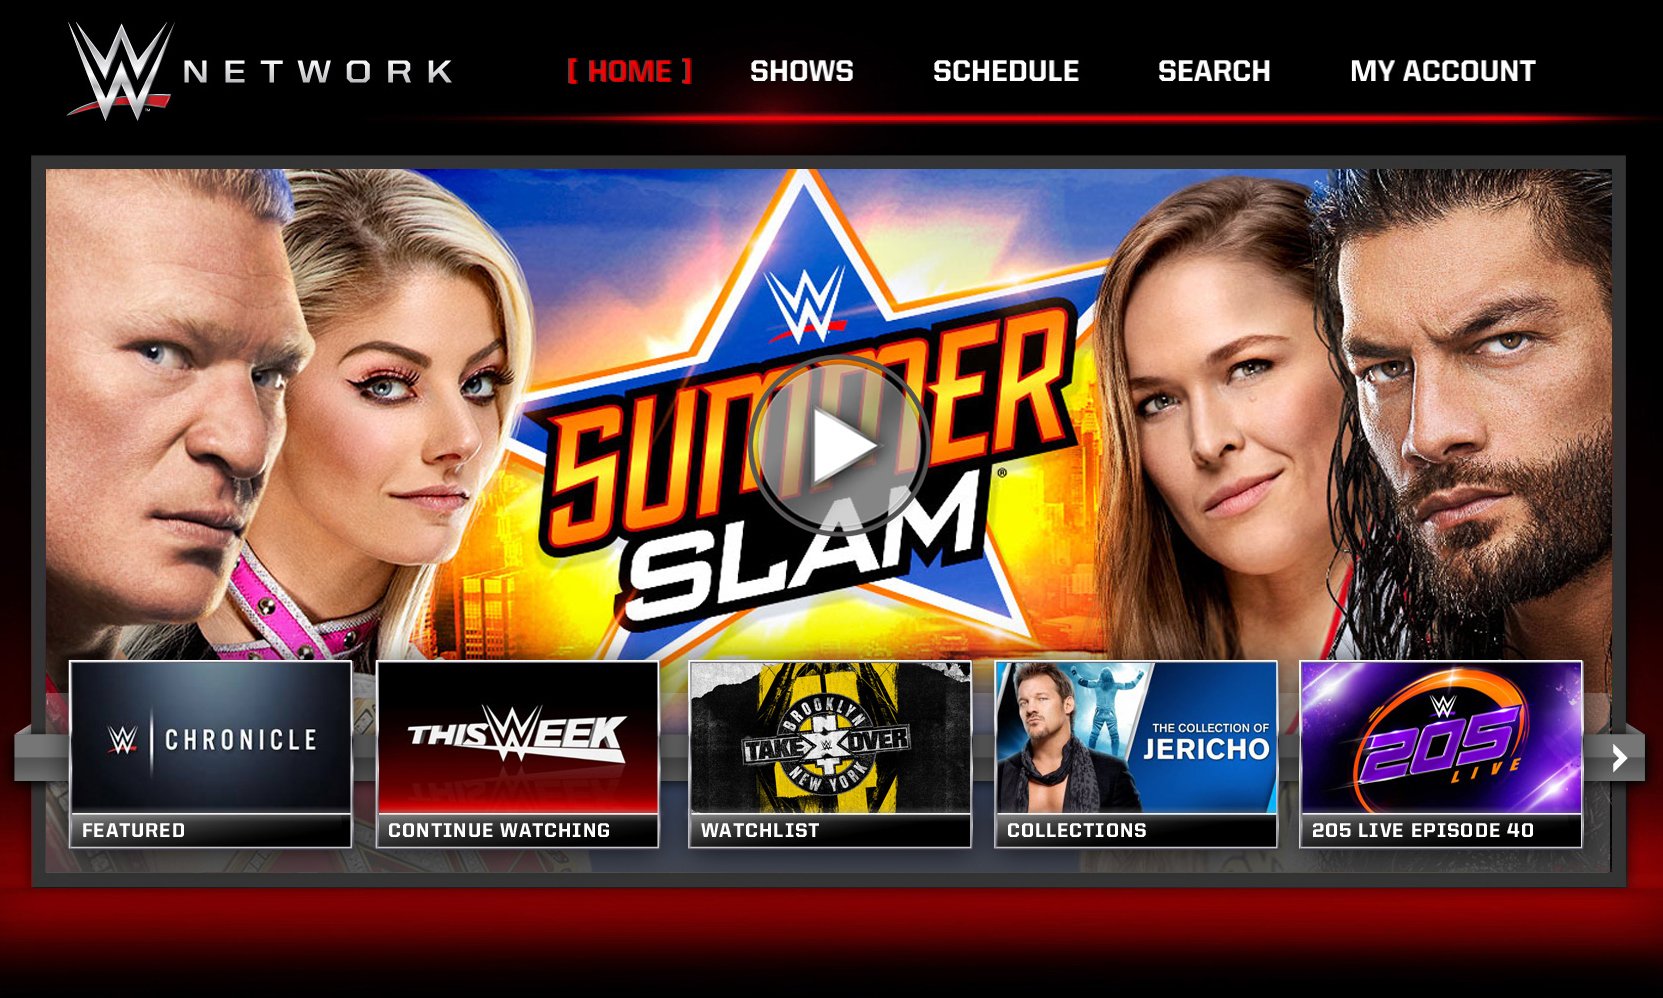 SummerSlam Hits Brooklyn, and WWE Network Takes Over the World